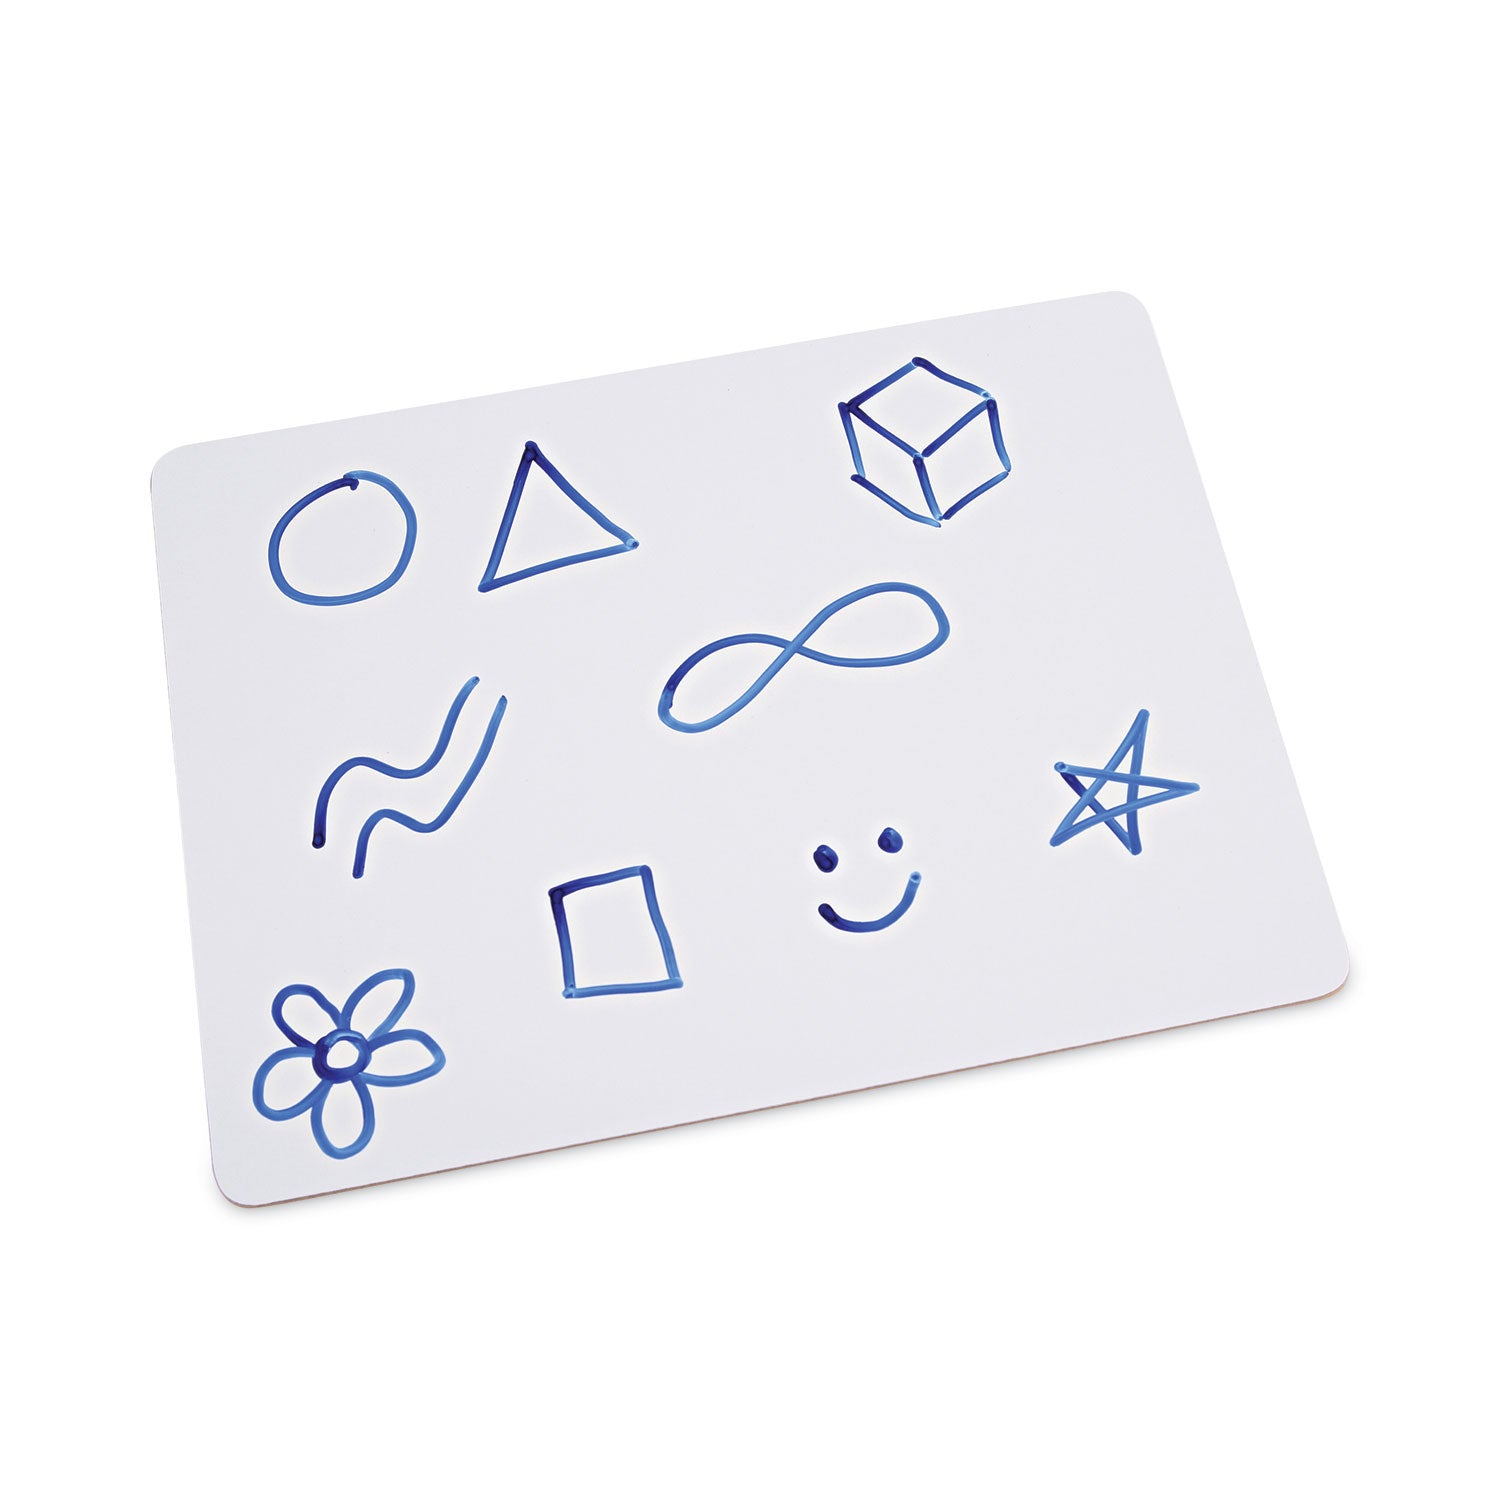 lap-learning-dry-erase-board-unruled-1175-x-875-white-surface-6-pack_unv43910 - 6